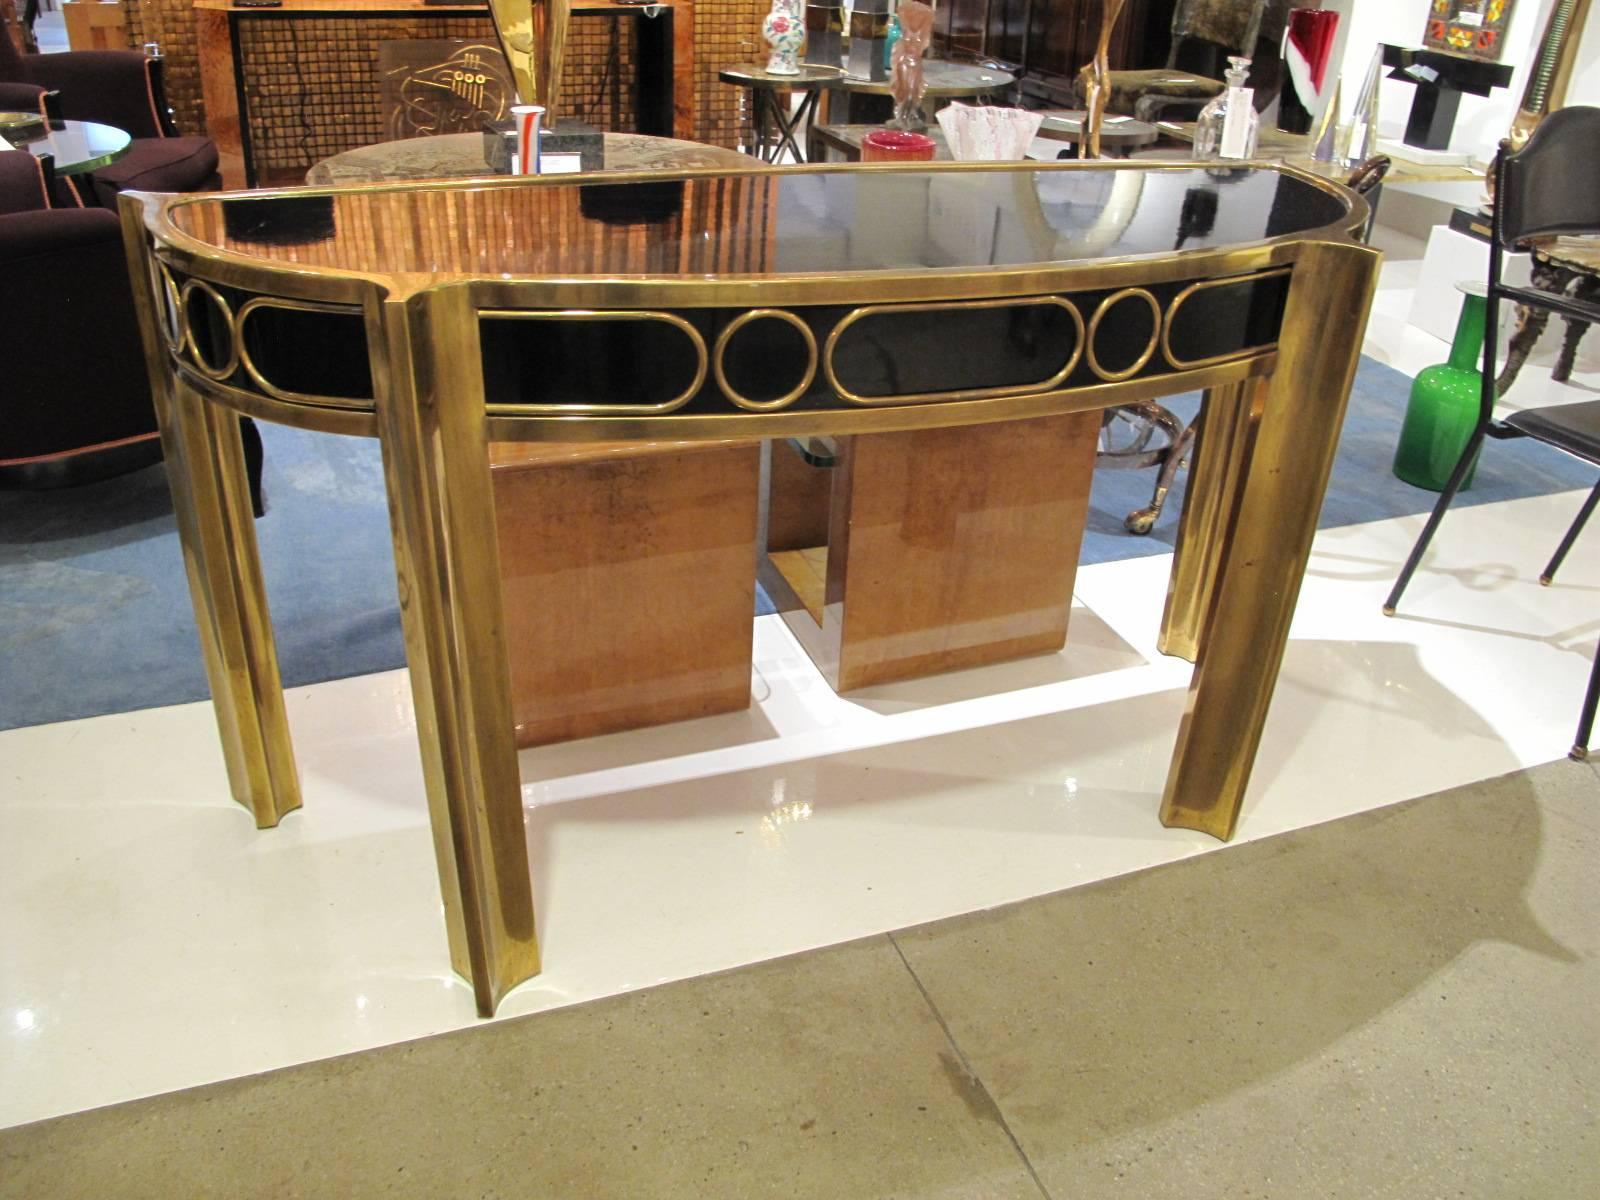 Demilune patinated brass console table with black enameled wood by Mastercraft.